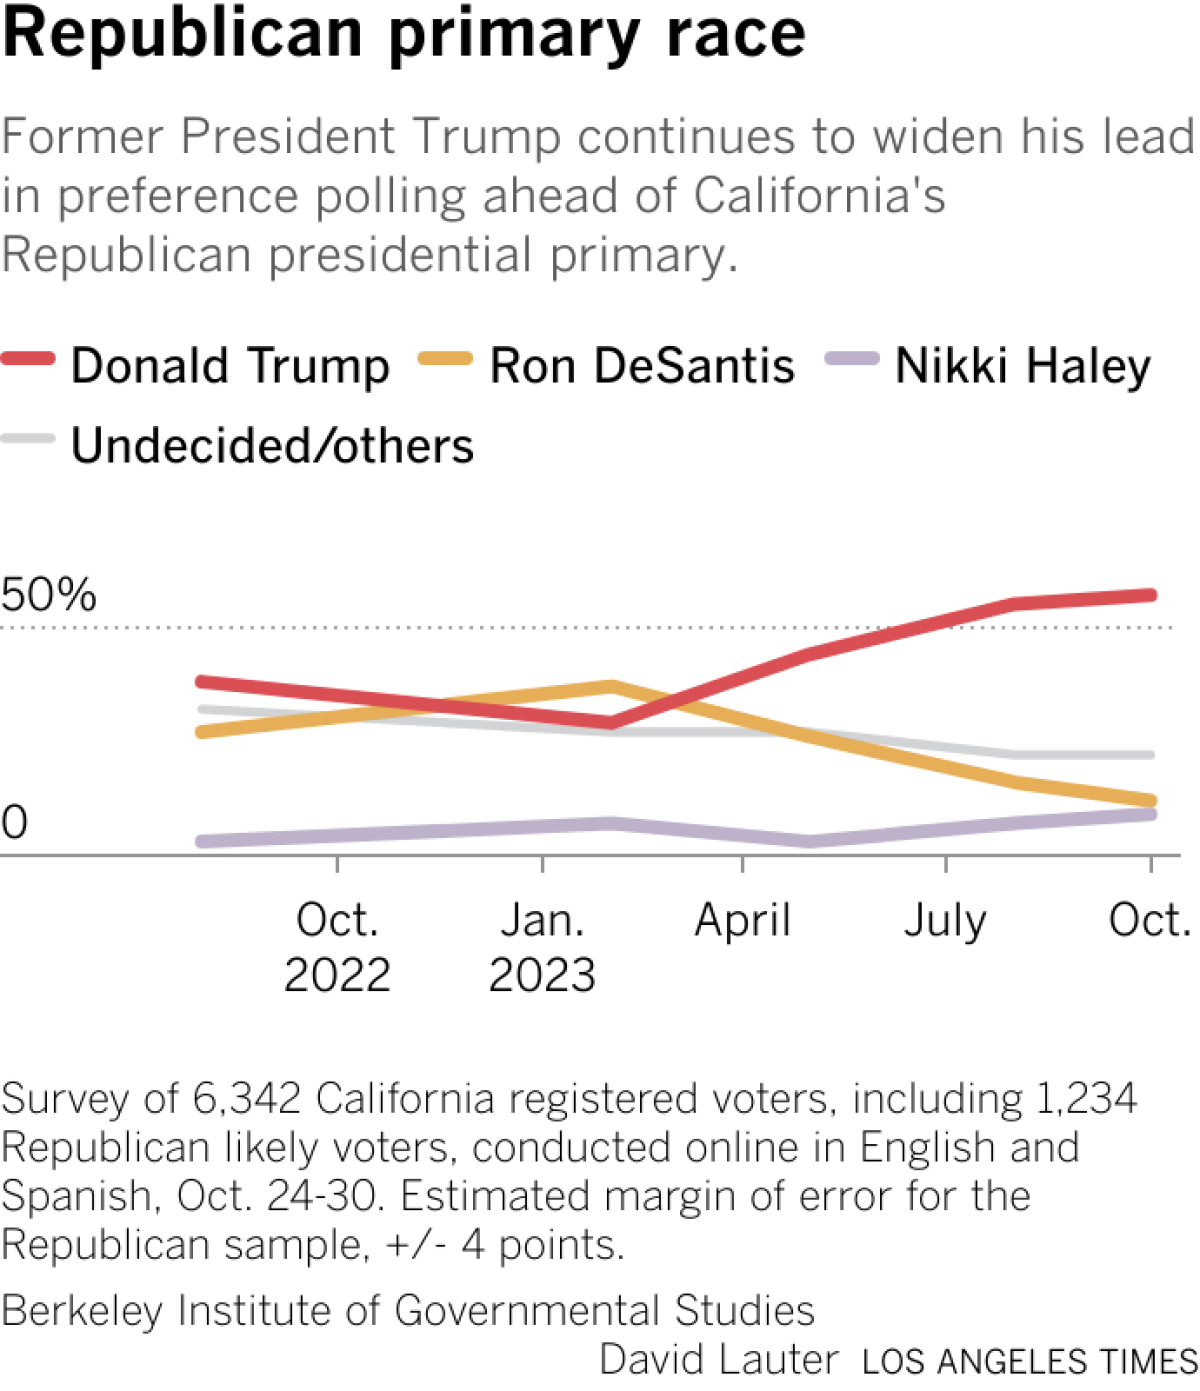 Line chart shows support for Trump rising steadily since February as support for Florida Gov. Ron DeSantis drops.